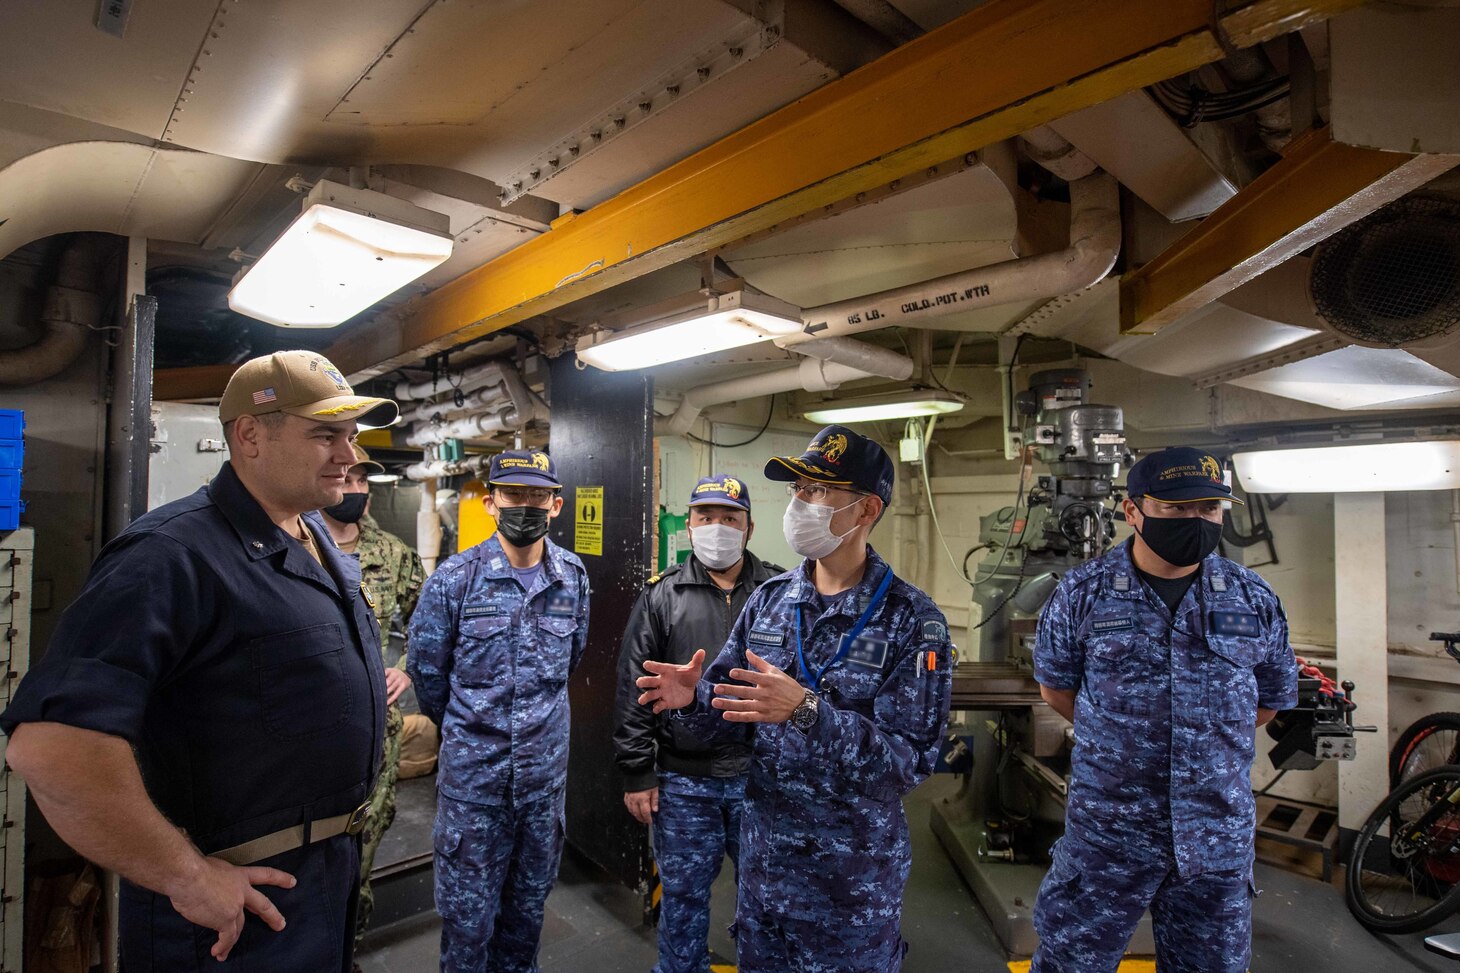 Cmdr. Bryan Gallant, the executive officer aboard the forward-deployed amphibious dock landing ship USS Rushmore (LSD 47), discusses the ship’s capabilities with Japan Maritime Self-Defense Force Cmdr. Hisanari Saito during a tour of the ship. Rushmore, part of Amphibious Squadron 11, is operating in the U.S. 7th Fleet area of responsibility to enhance interoperability with allies and partners and serve as a ready response force to defend peace and stability in the Indo-Pacific region.